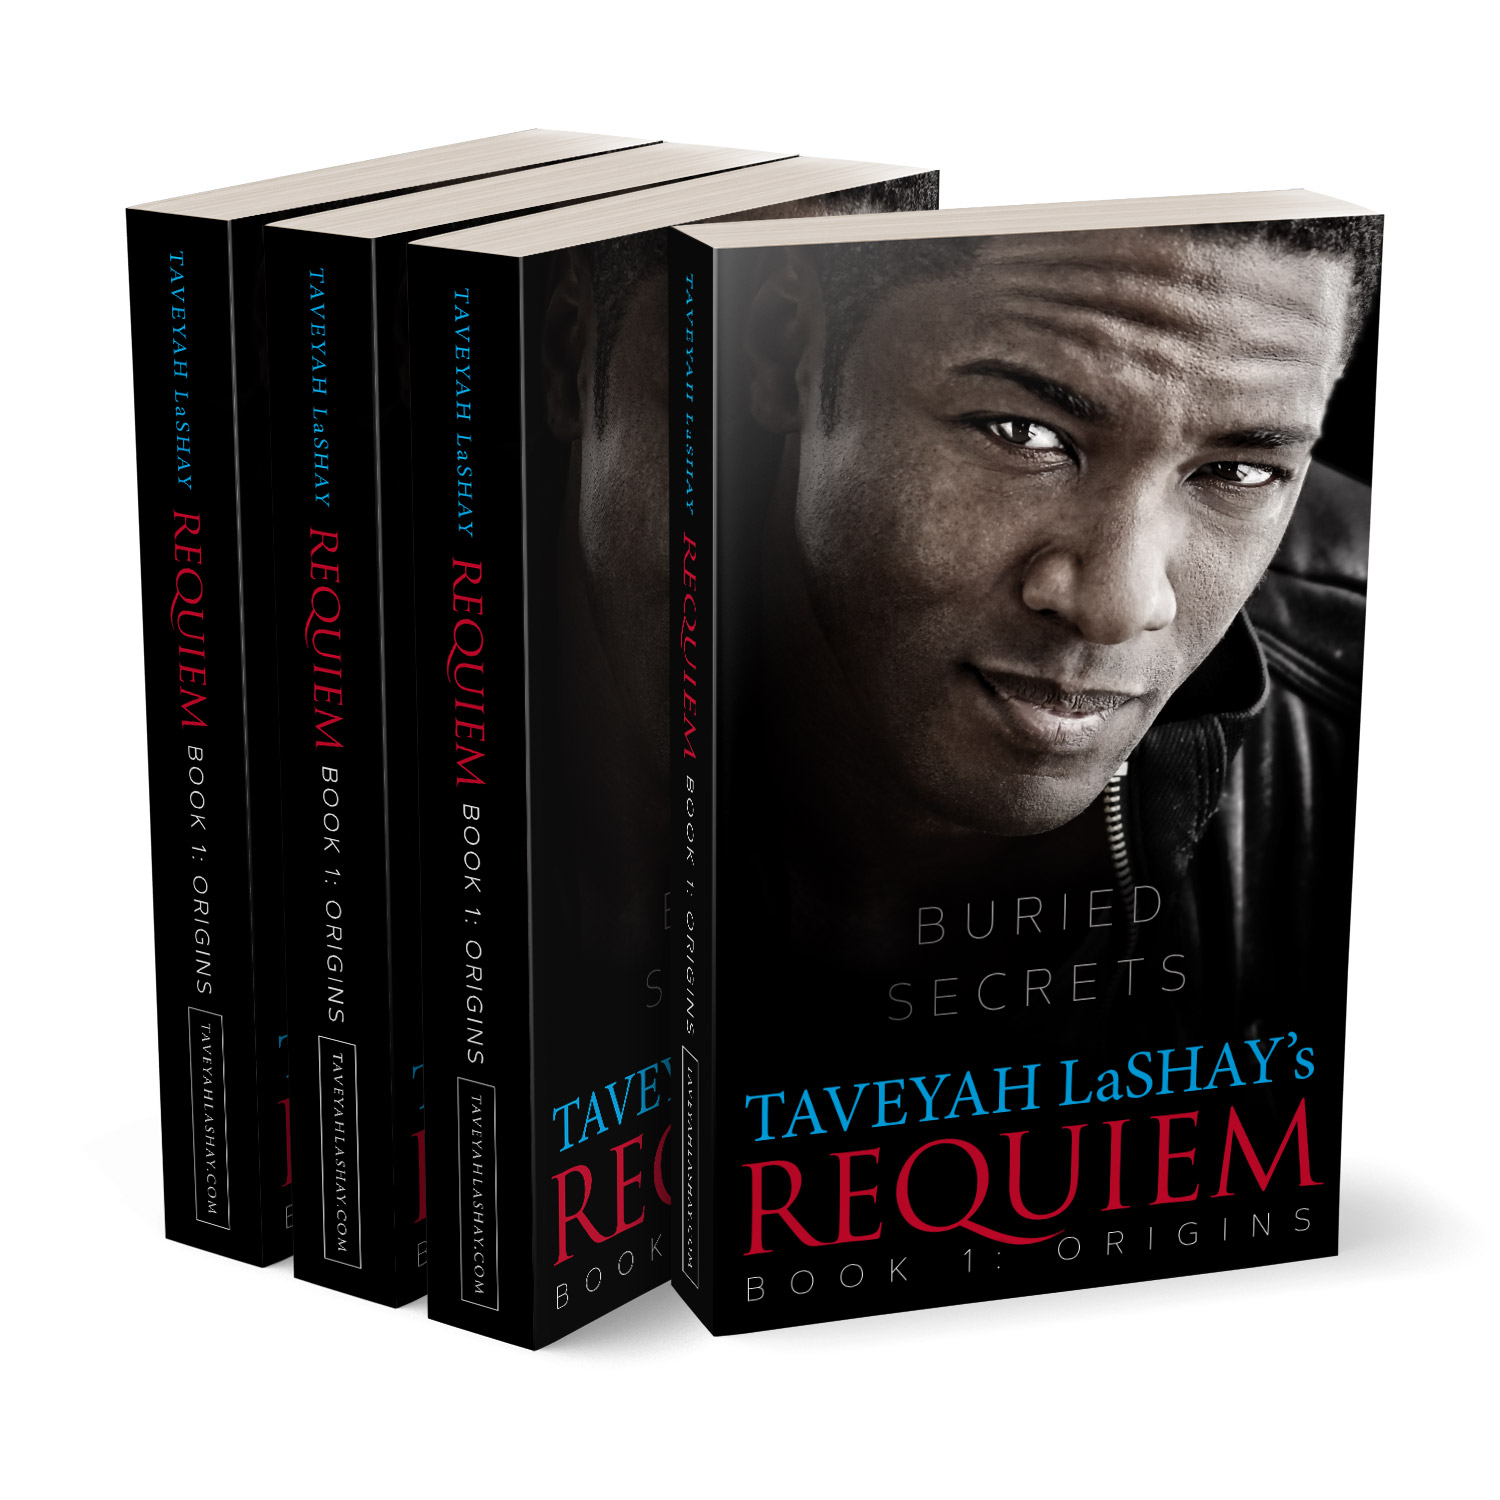 The Requiem Trilogy is a dark and steamy thriller series. The author is Taveyah LaShay. The book cover and interior formatting are designed by Mark Thomas of coverness.com. To find out more about my book design services, please visit www.coverness.com